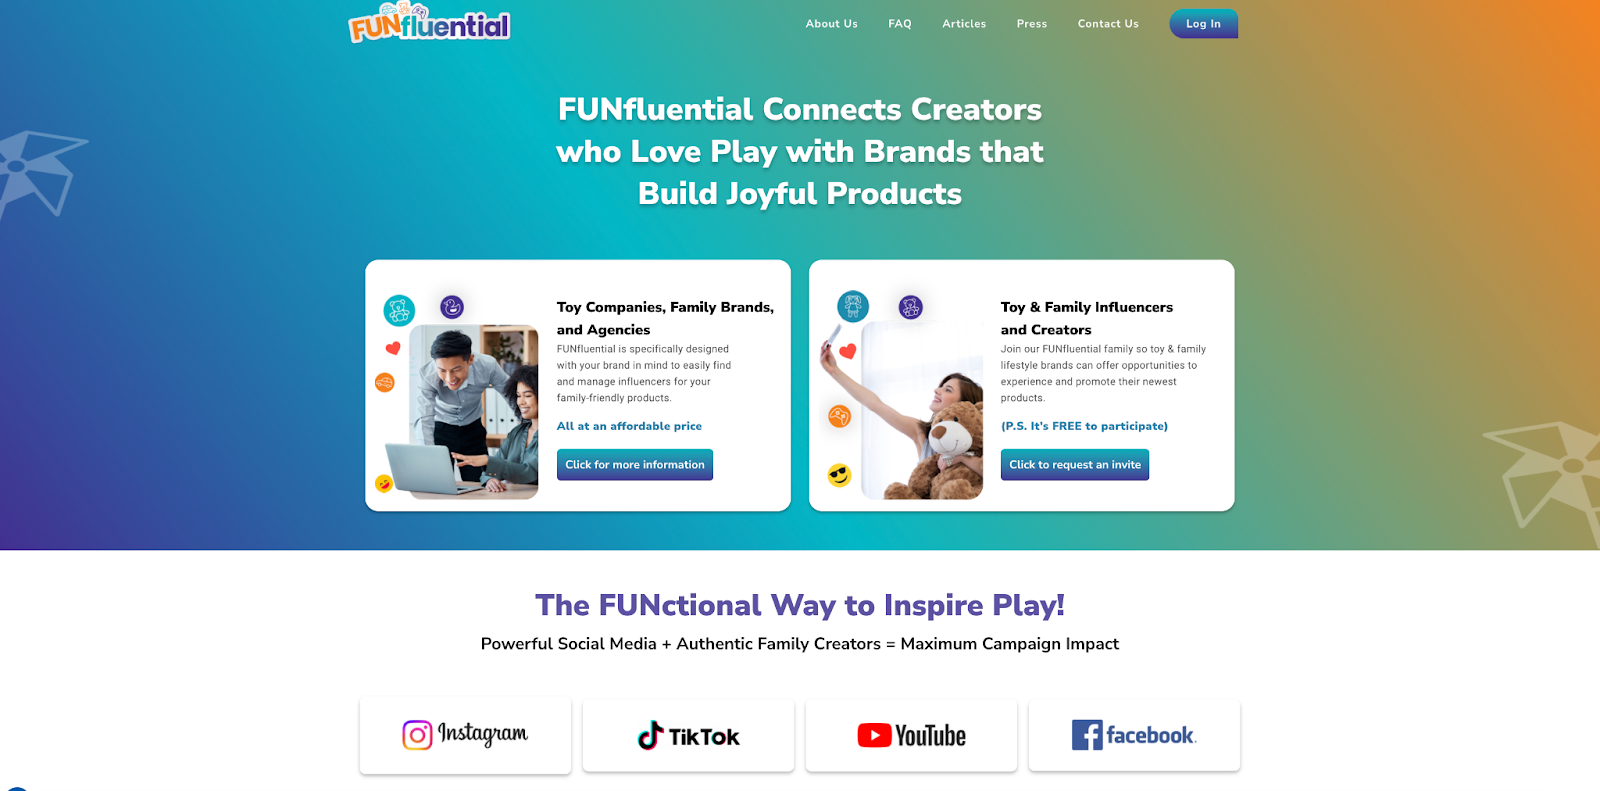 Revolutionizing Toy Marketing: The Rise Of FUNfluential By The Toy Insider With Deborah Stallings Stumm